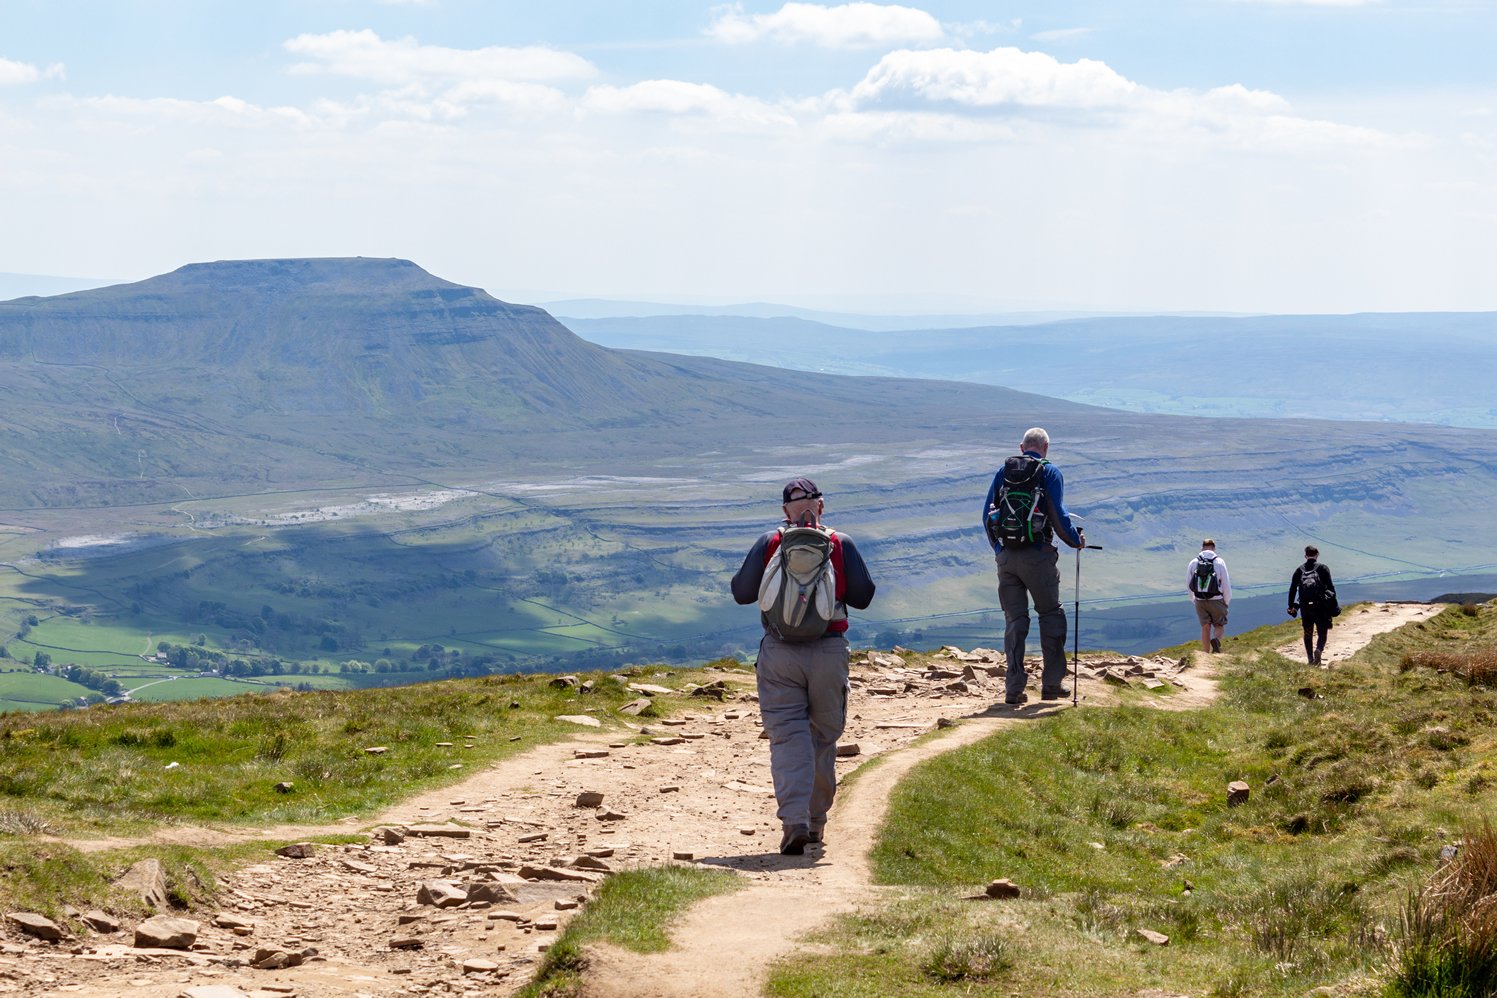 Image name walkers descending whernside view of ingleborough sunny yorkshire the 2 image from the post March forth on March the 4th! in Yorkshire.com.